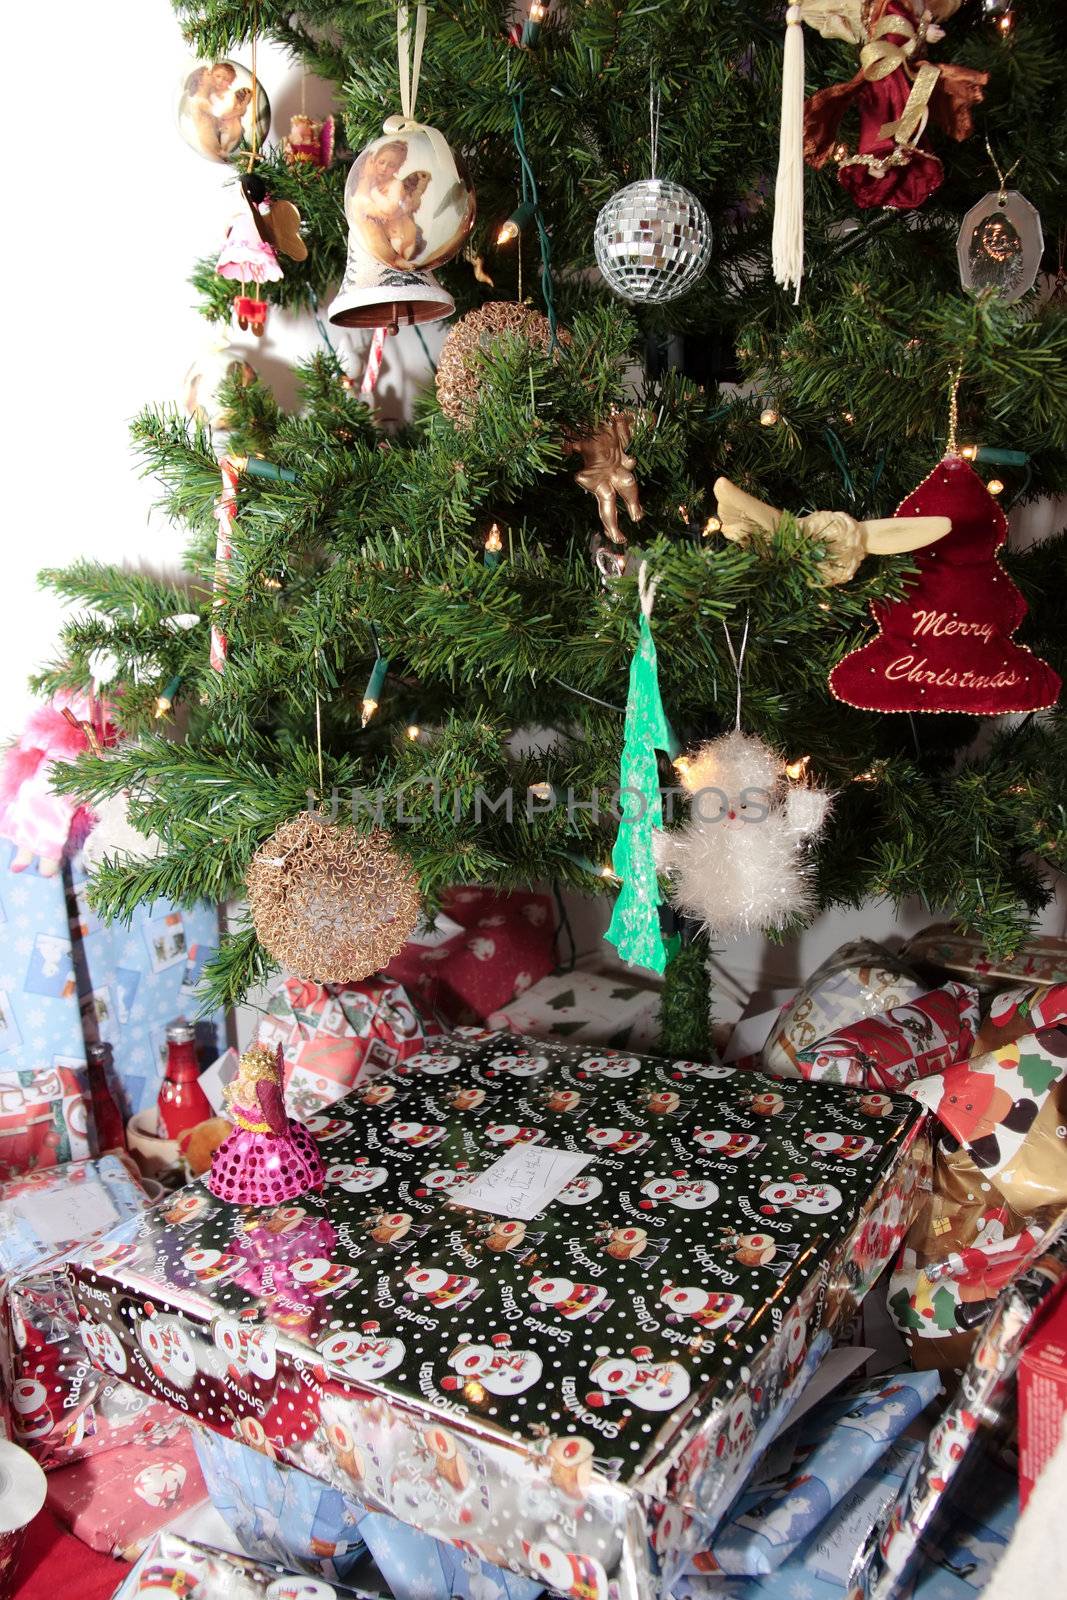 christmas tree decorations hanging from the tree with wrapped presents underneath